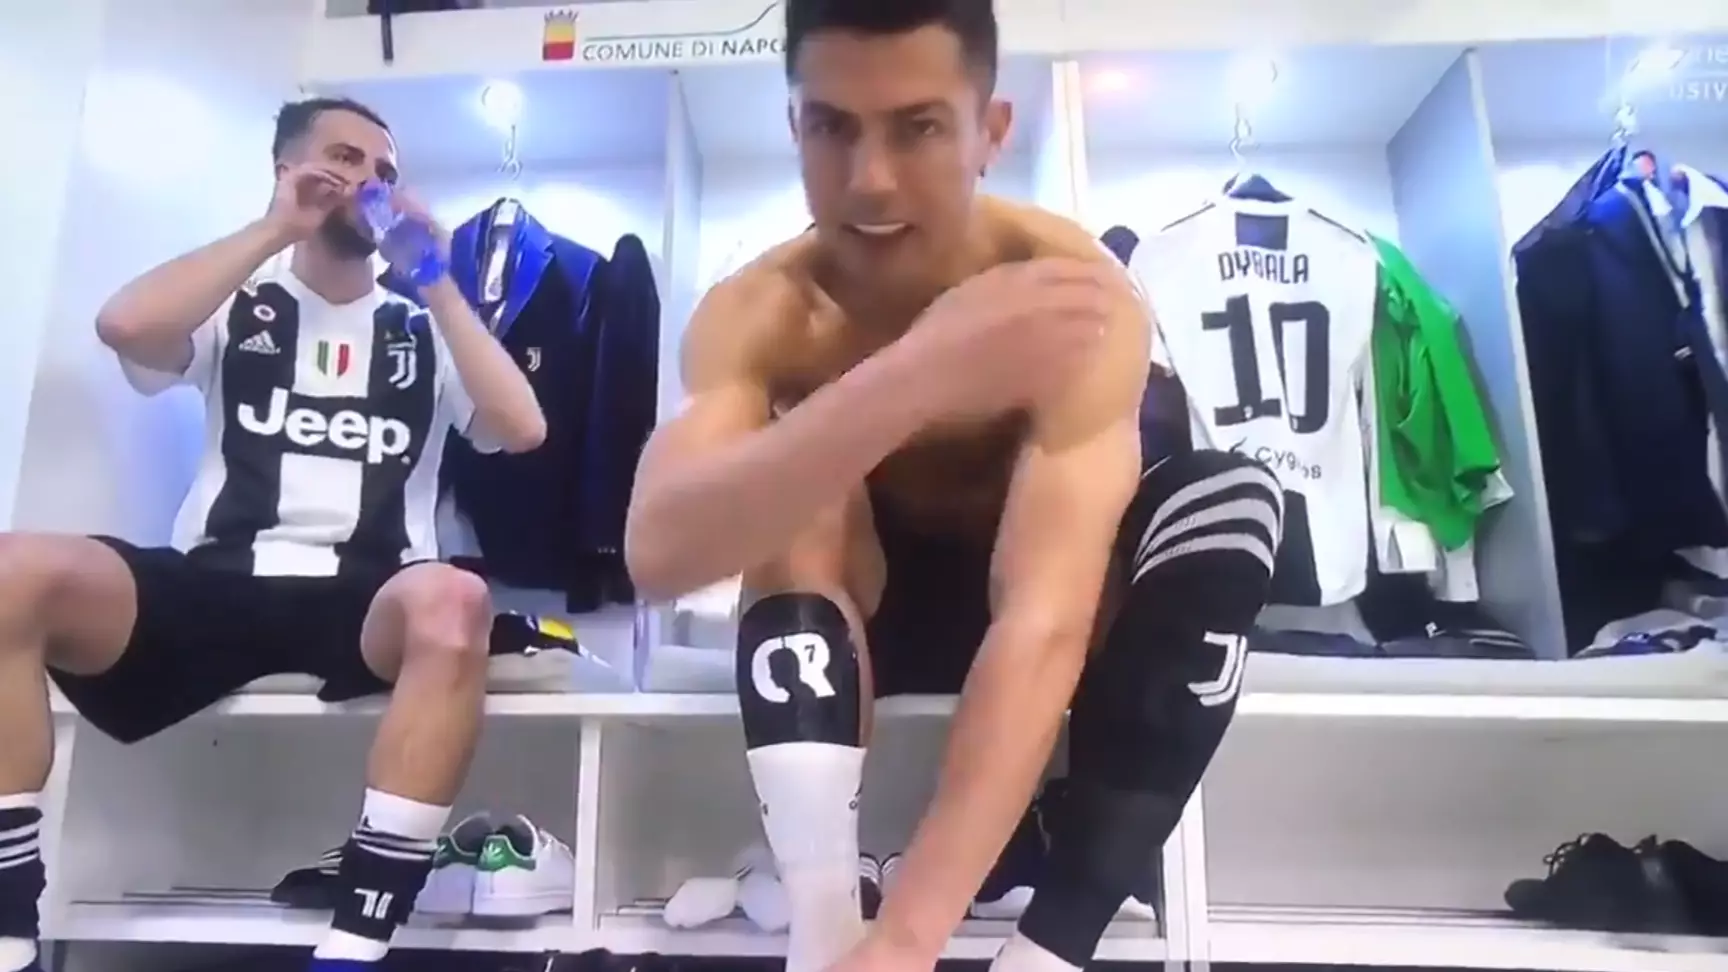 Cristiano Ronaldo Did Not Want To Be Filmed In Changing Room Prior To Napoli Win